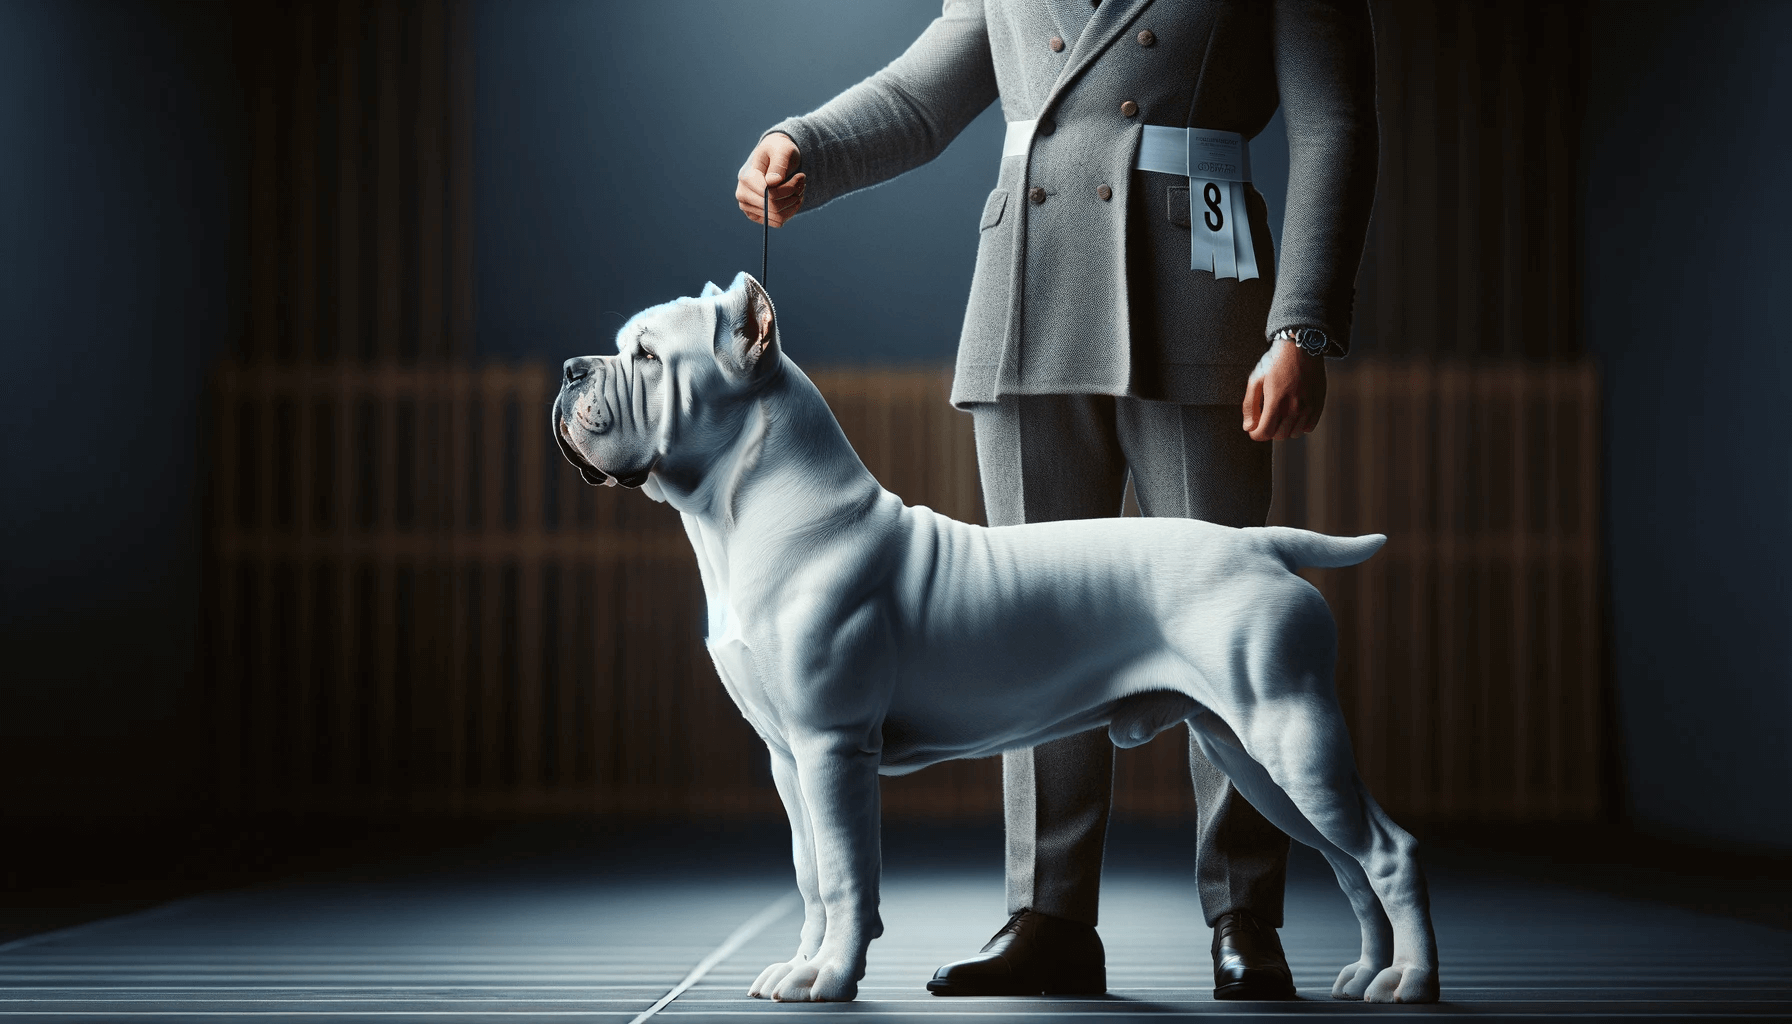 A muscular White Cane Corso in a side stance with a handler, showing the breed's muscular build and attentive posture.